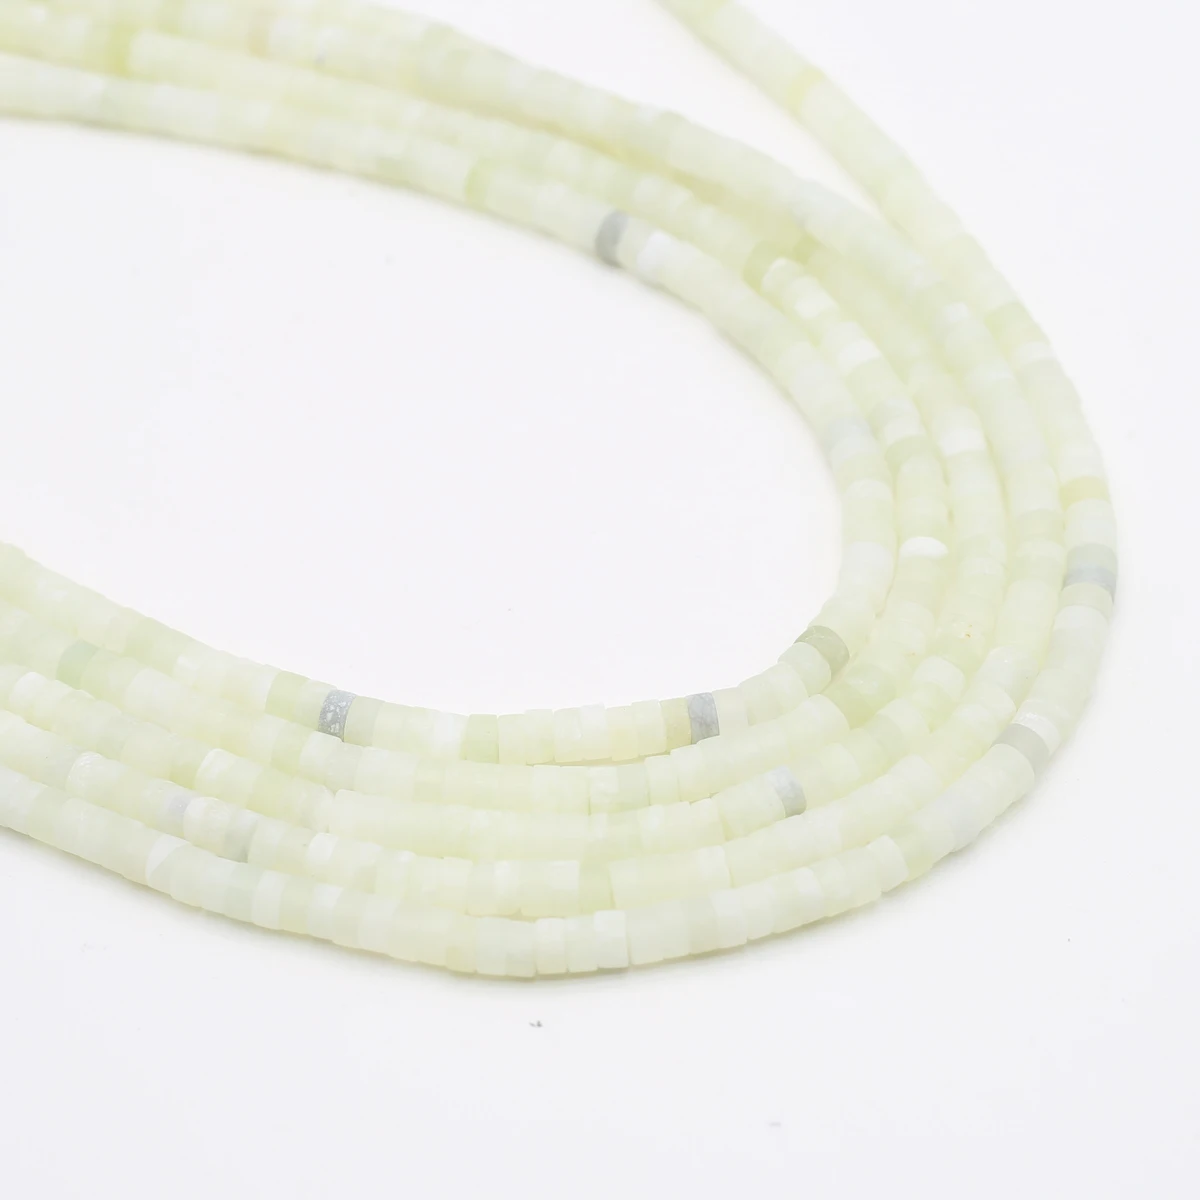 

Faceted Natural Stone Frosted Glazed Jade Beads 2x4mm Cylindrical Loose Spacer Beads for Jewelry Making DIY Crafts Wholesale Lot